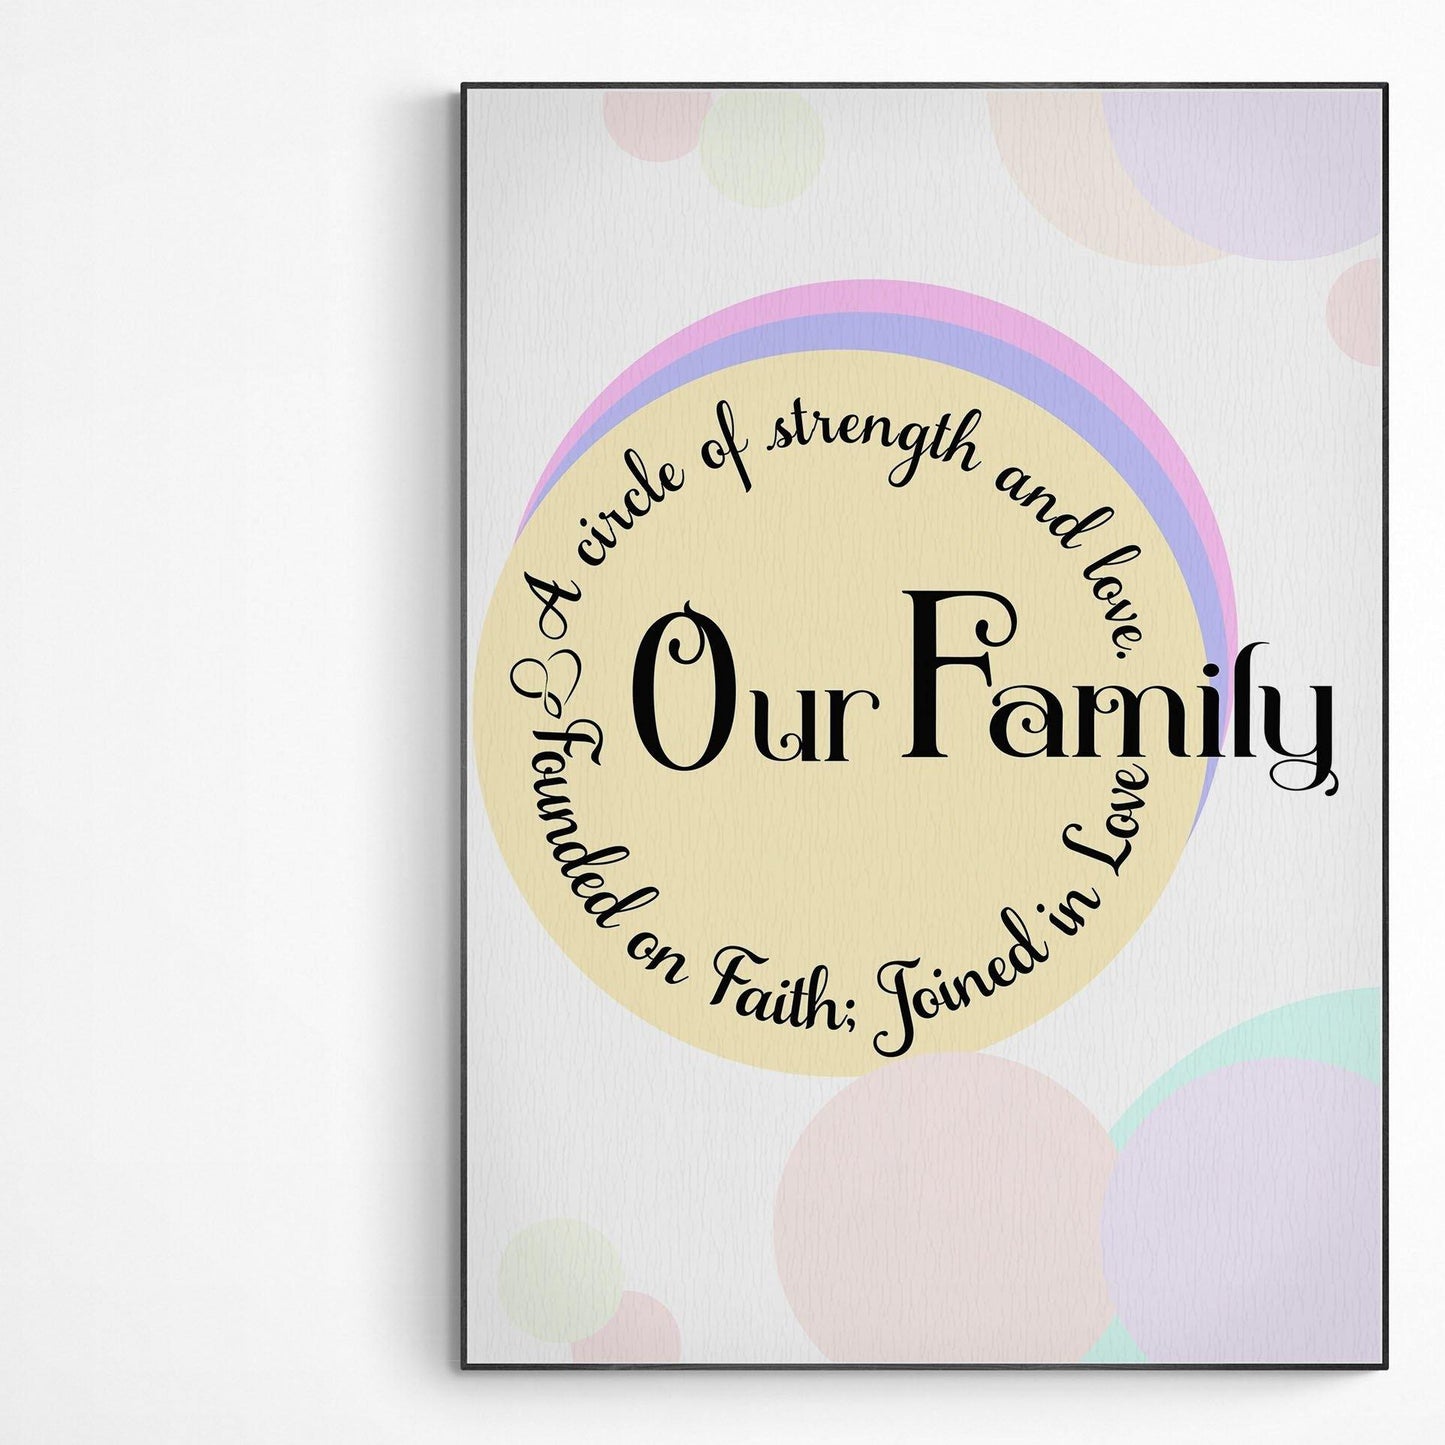 Our Family is the Best Poster | Original Print Art | Motivational Poster Wall Art Decor | Greeting Card Gifts | Variety Sizes